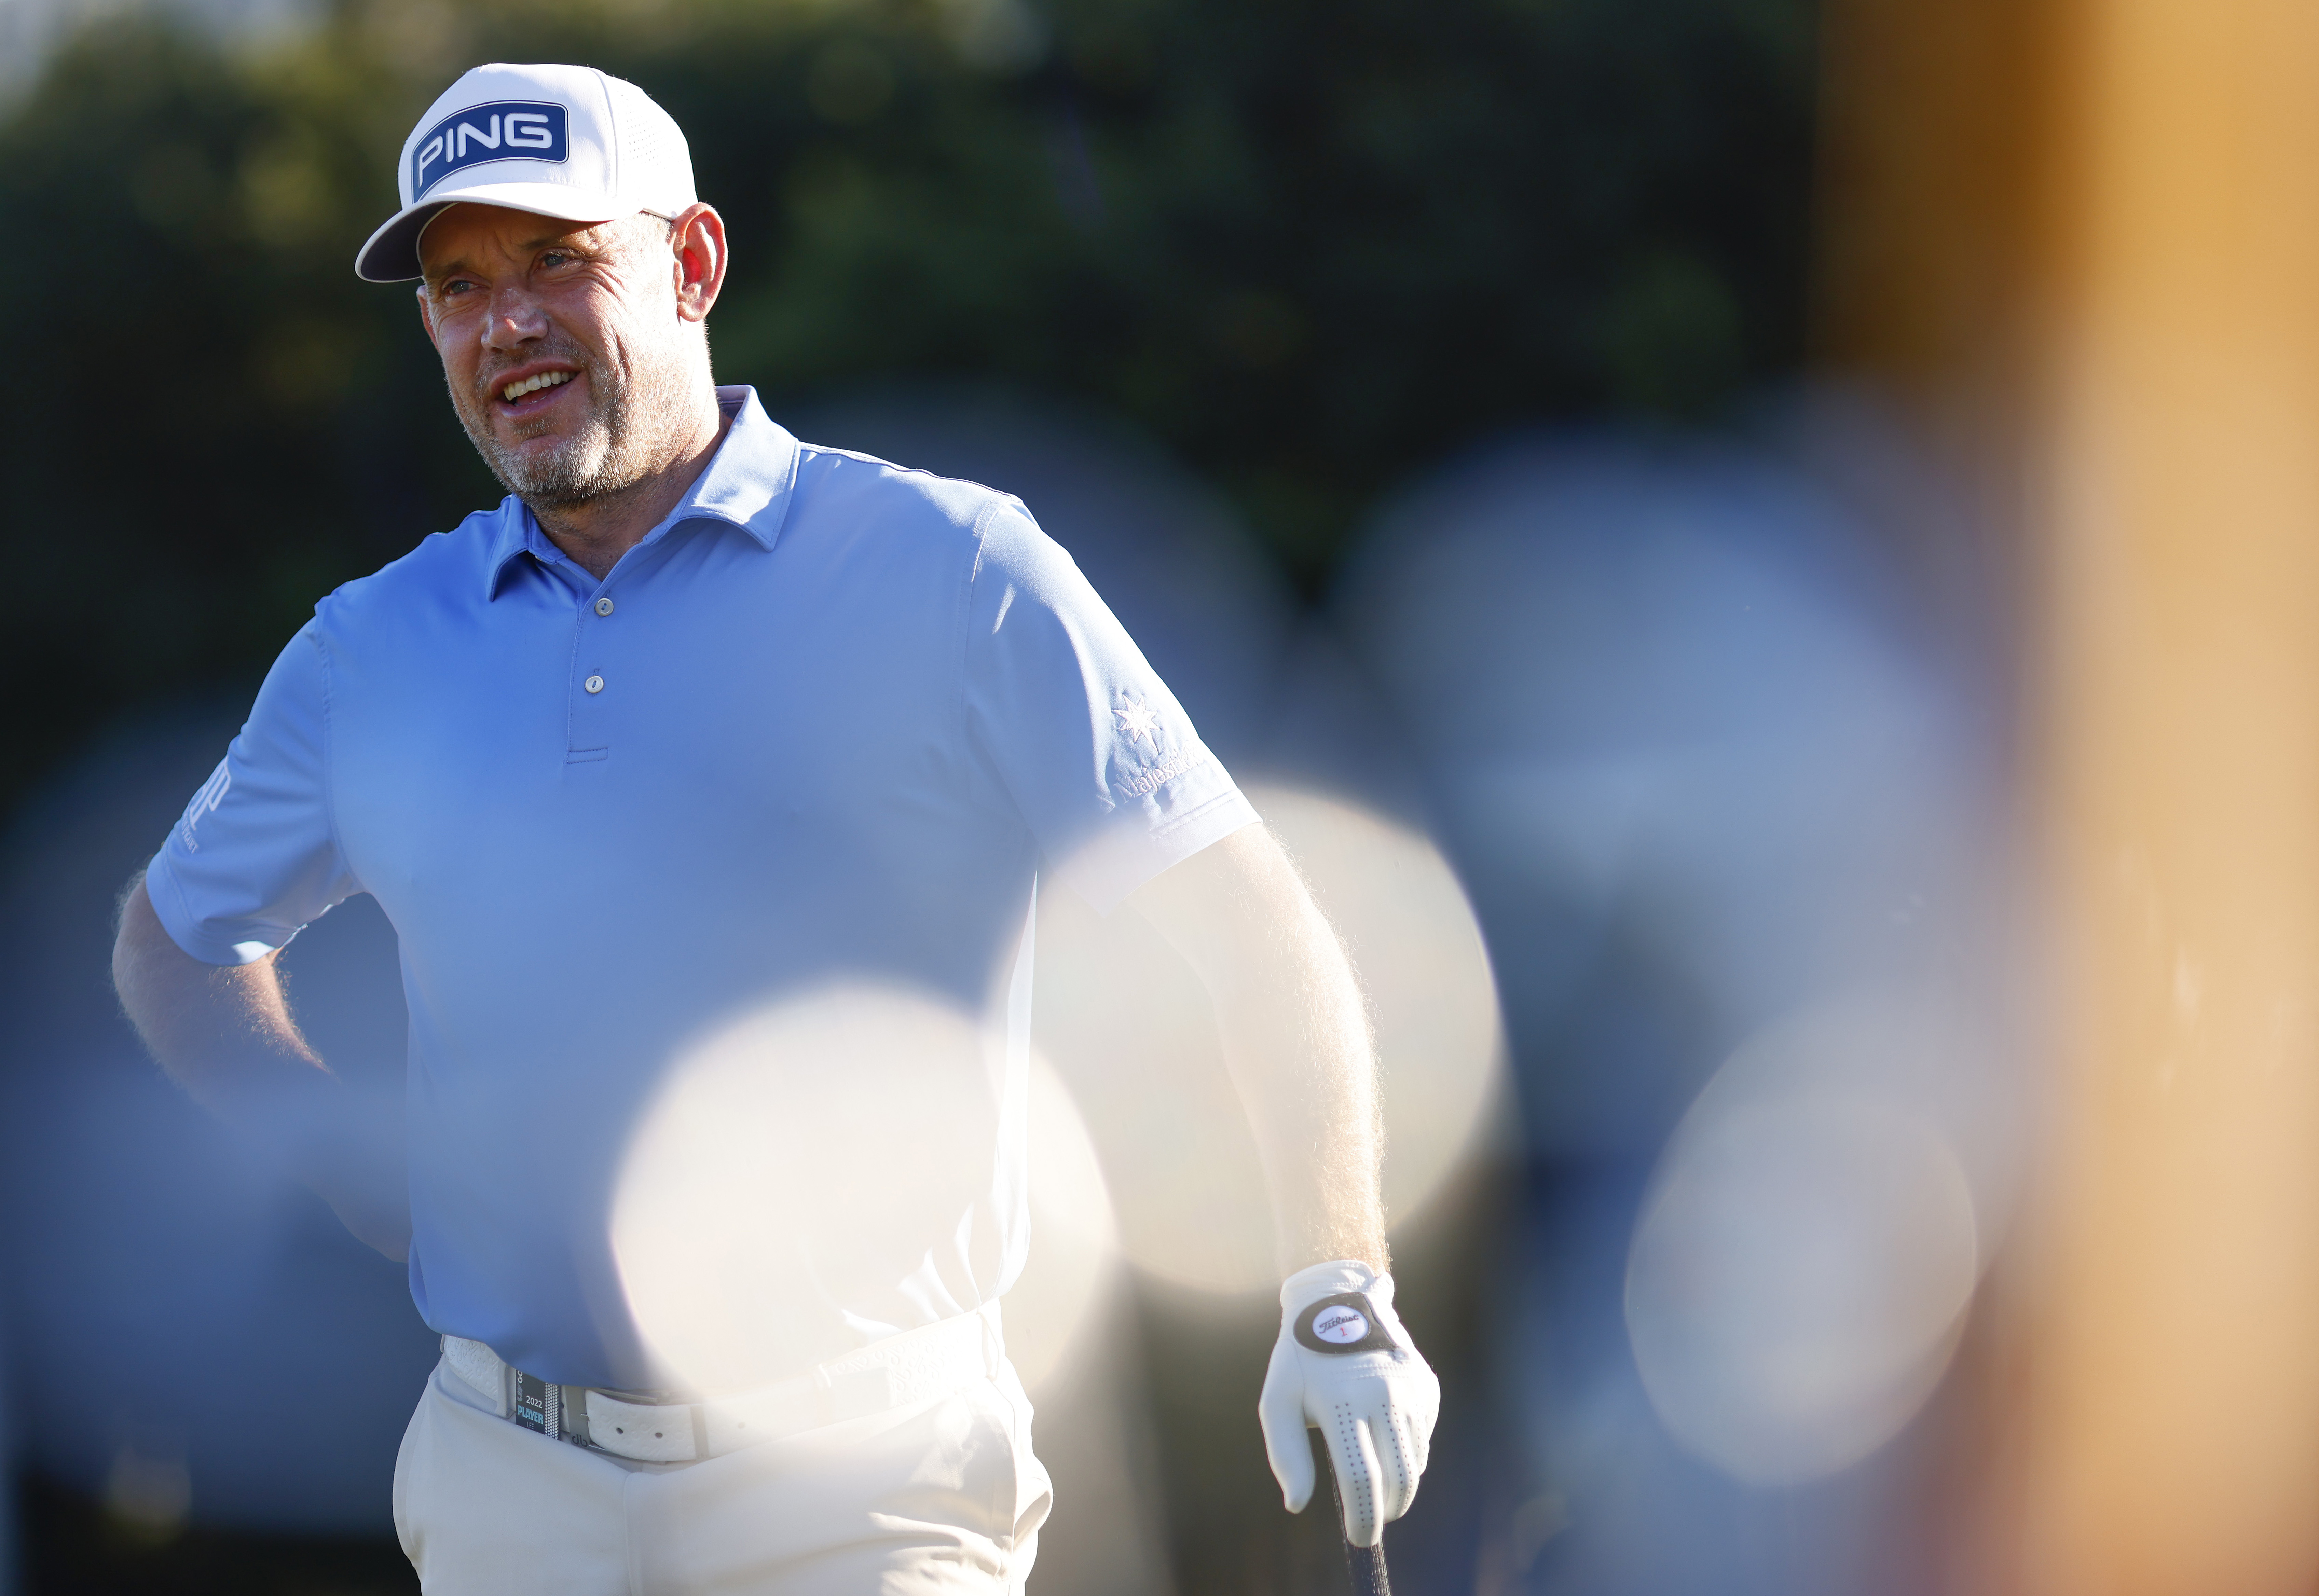 30 THINGS WORTH KNOWING ABOUT LEE WESTWOOD'S PRO CAREER | LIV Golf